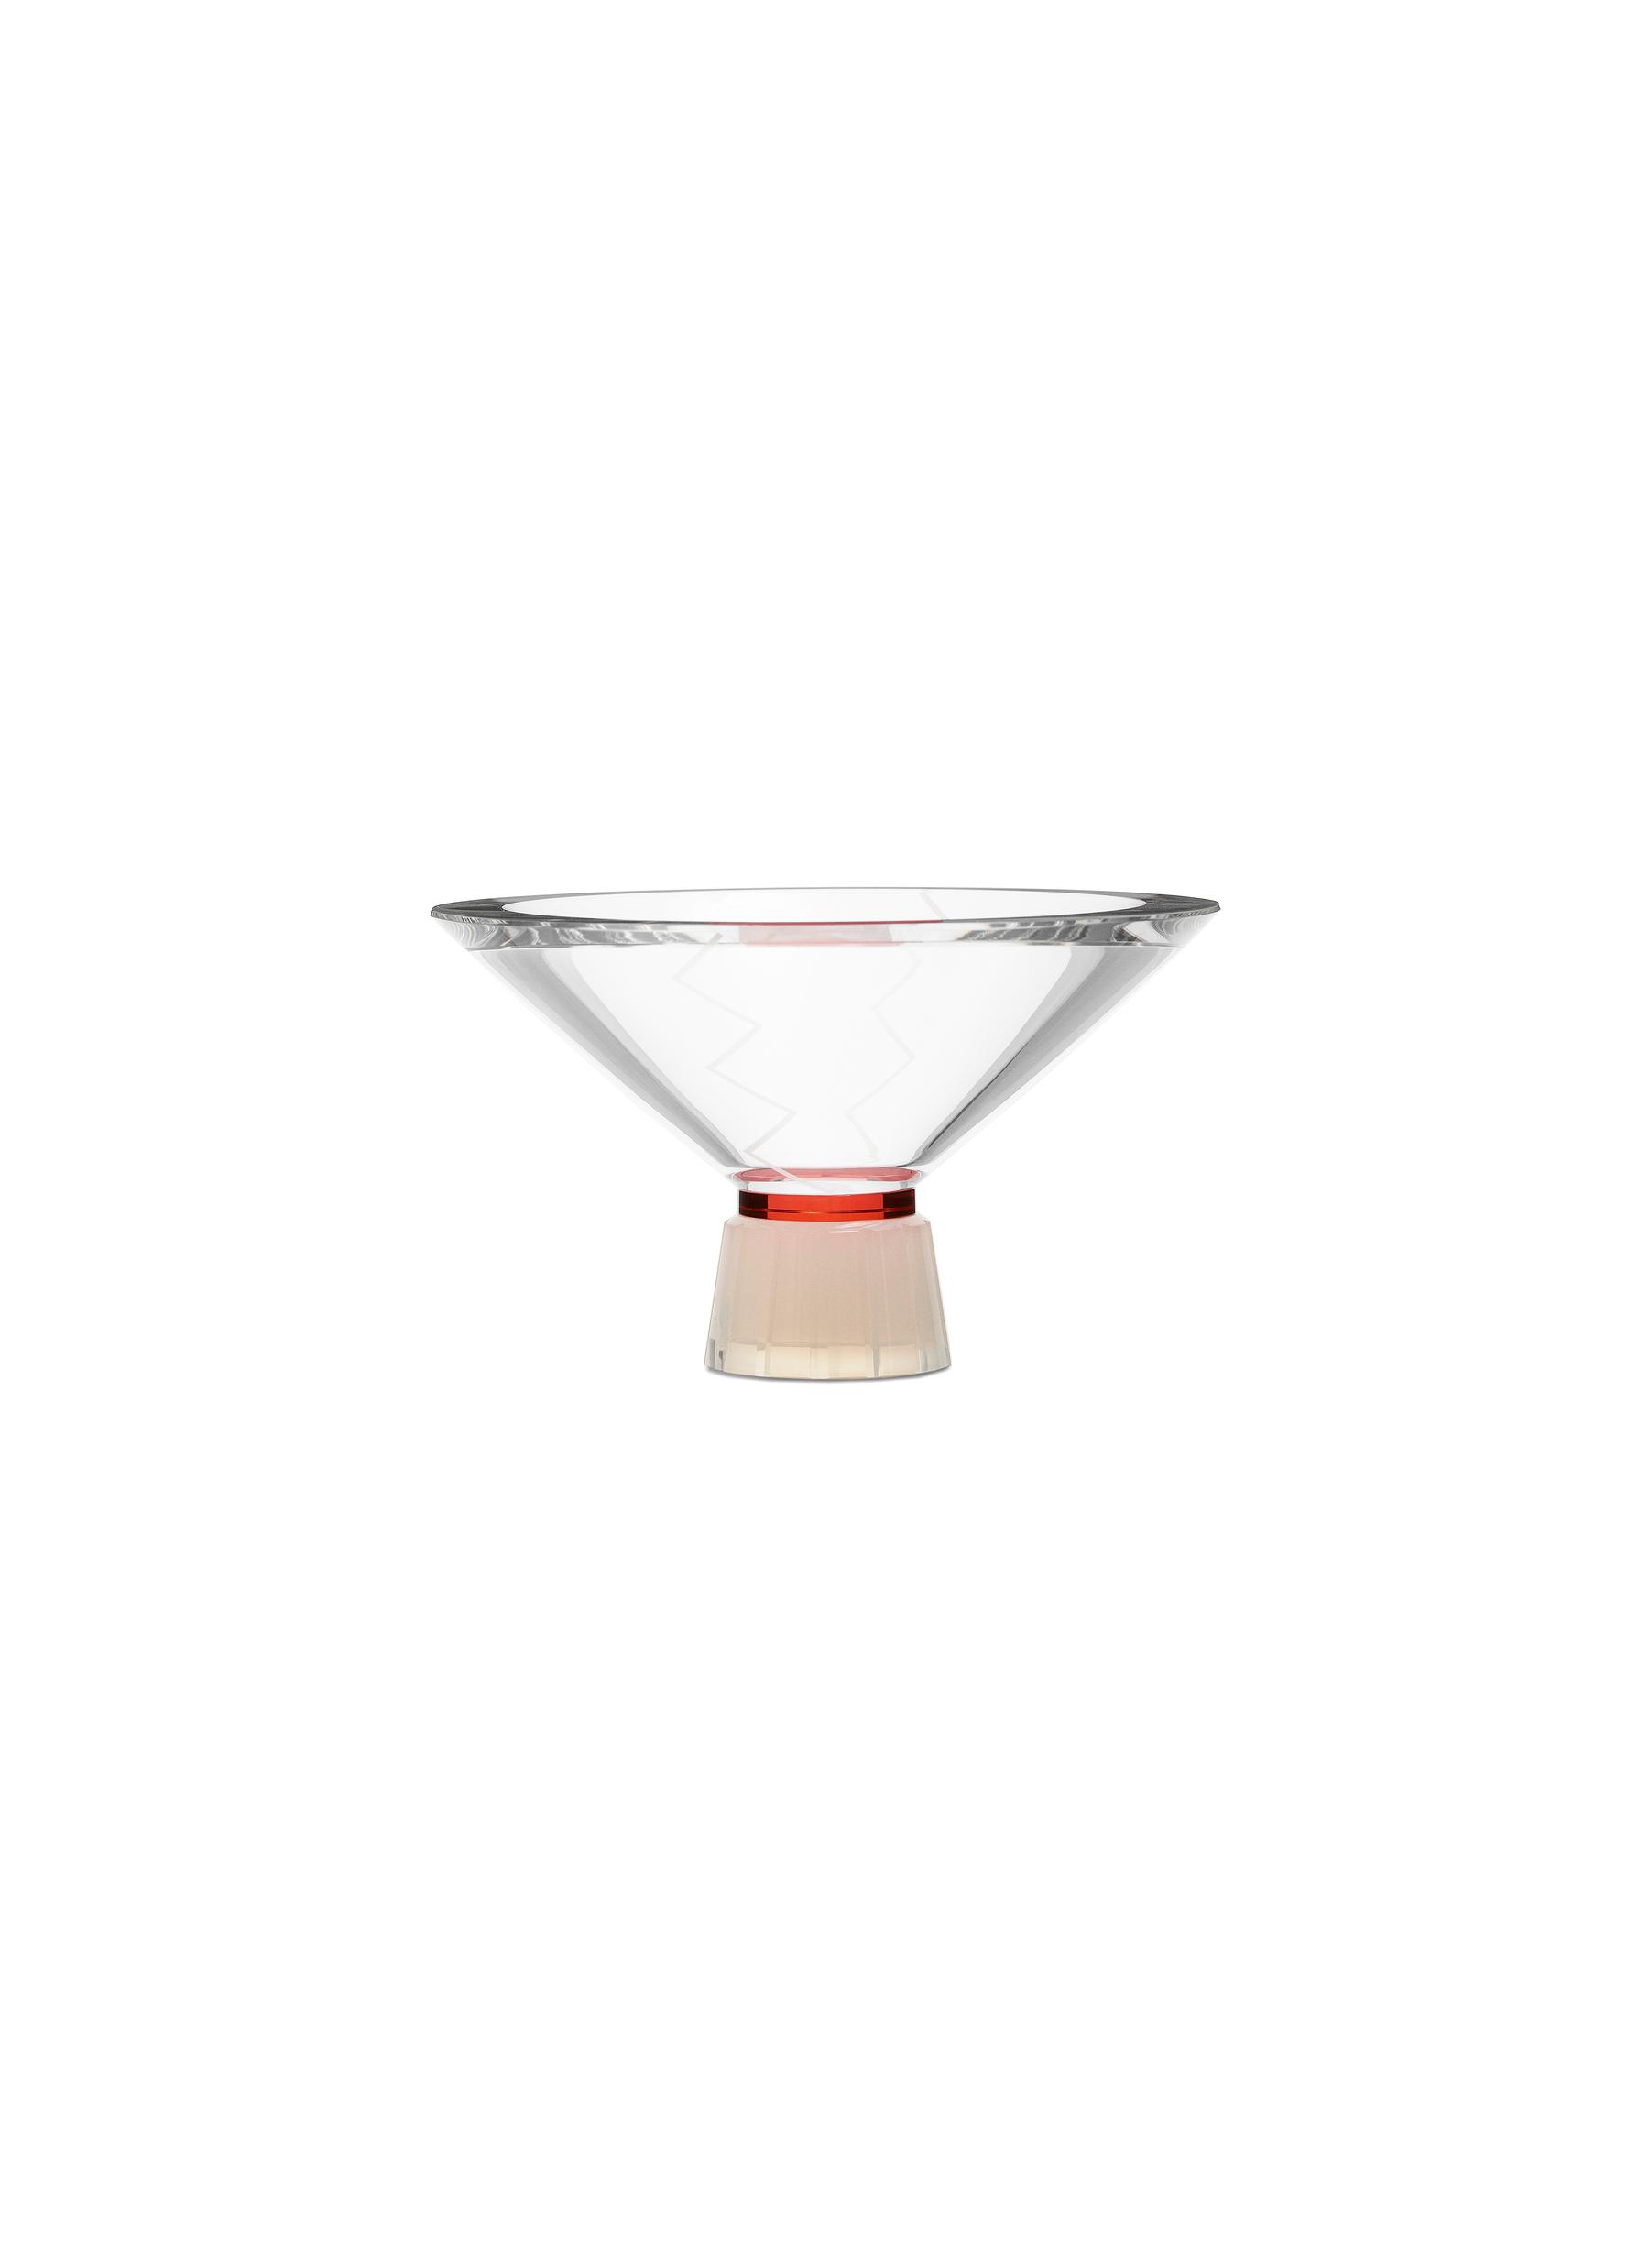 HOPE CRYSTAL BOWL - CLEAR/RED/MILK